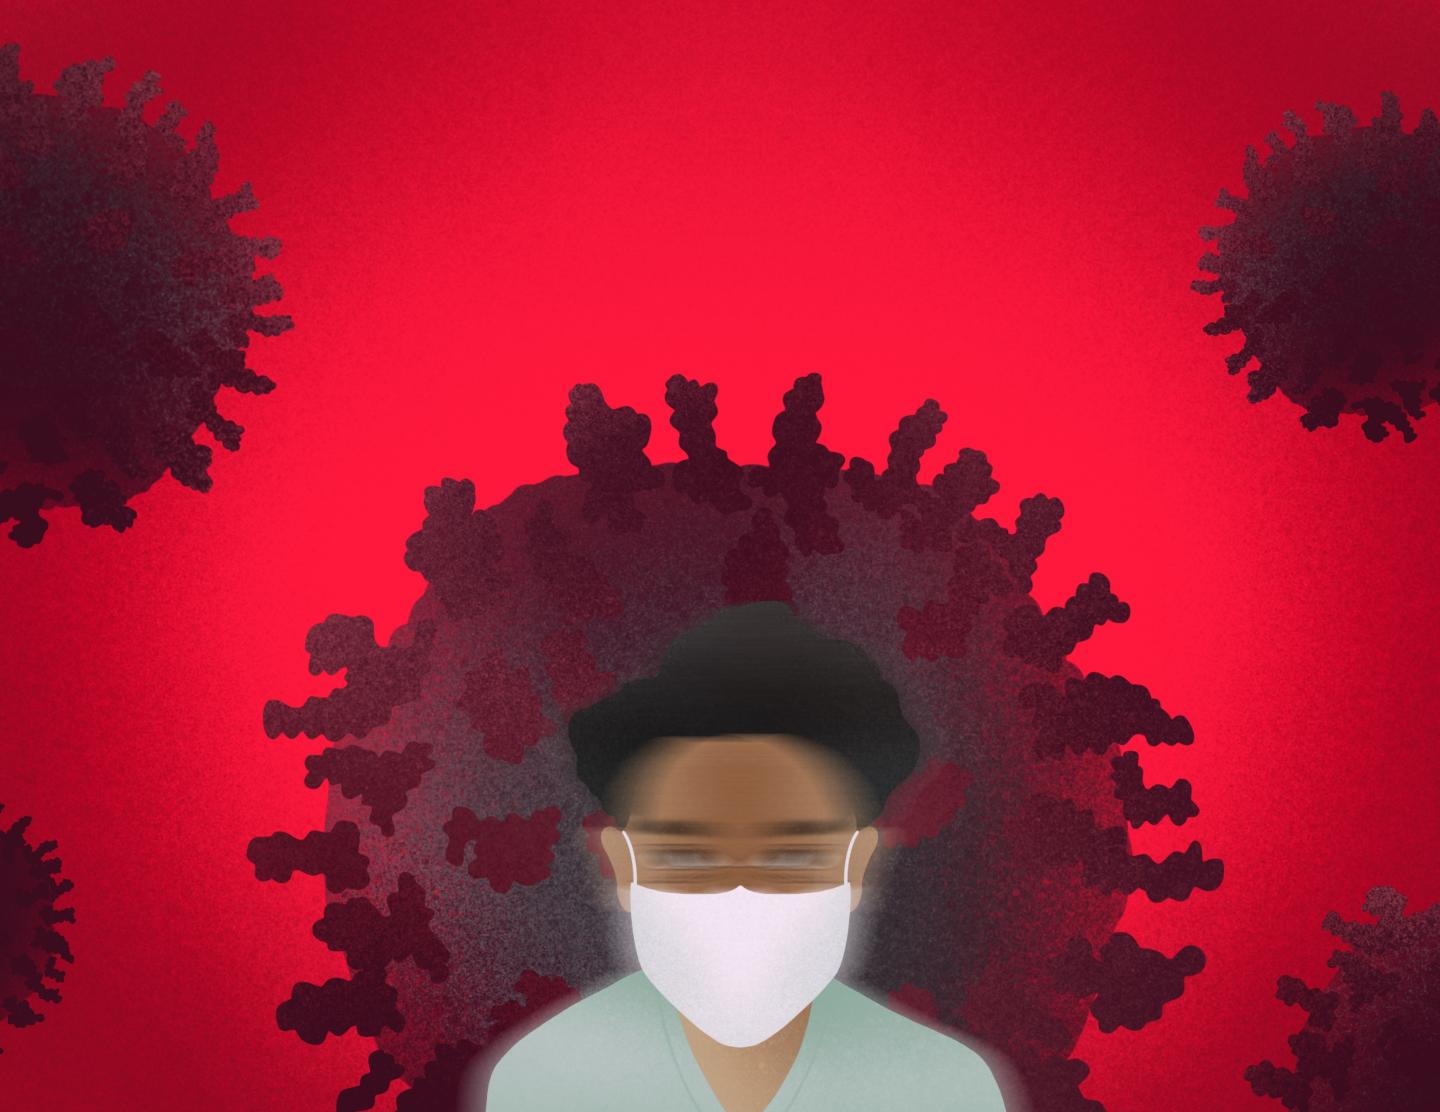 drawing of man wearing face mask with virus images behind him